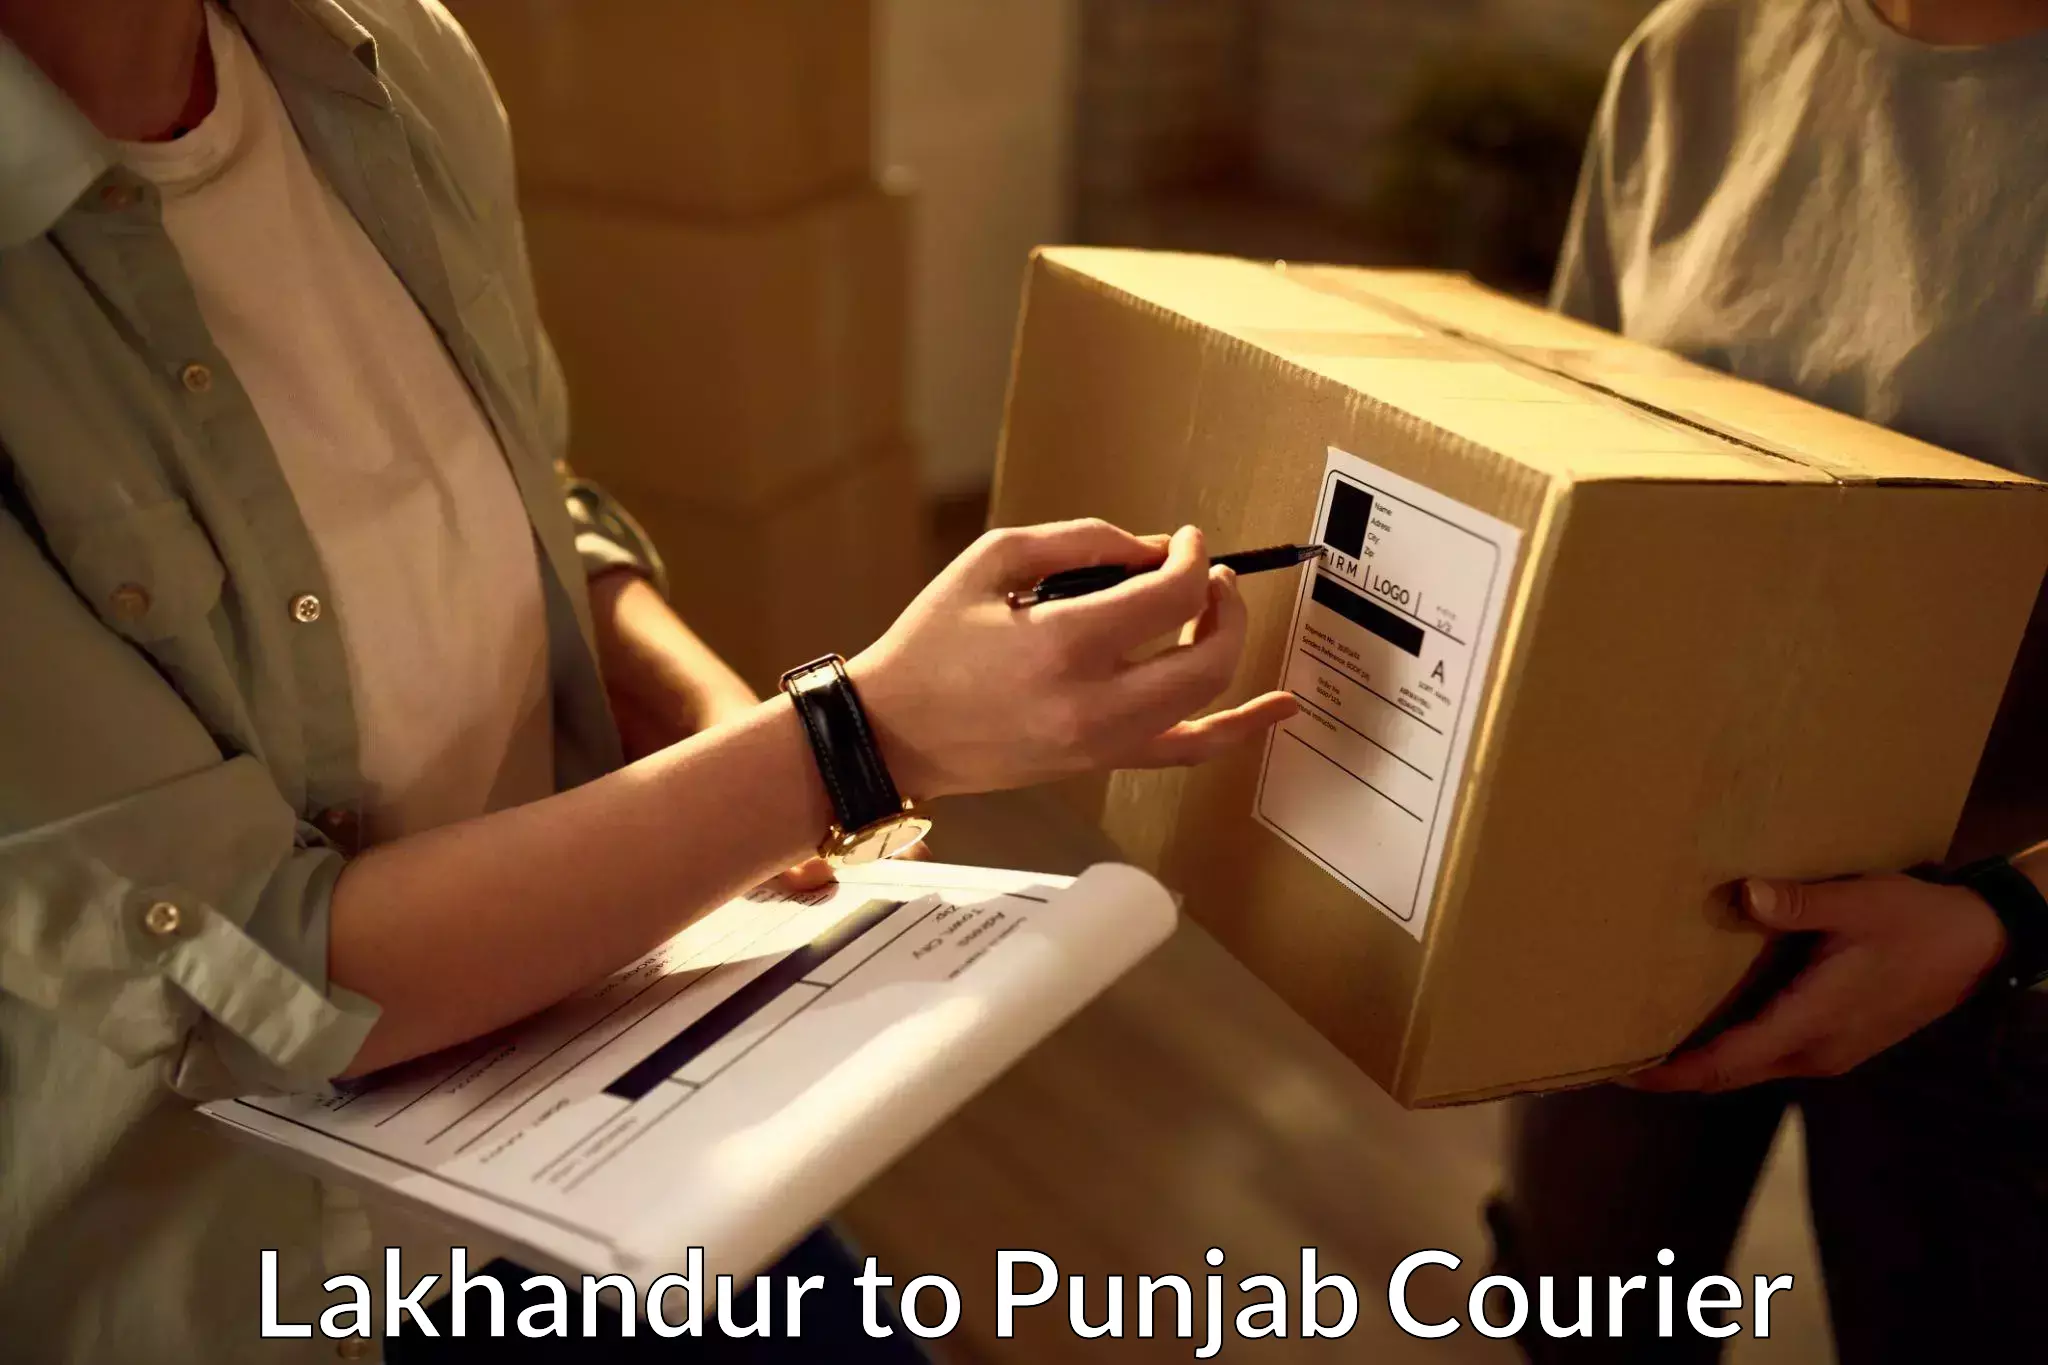 Courier service innovation Lakhandur to Amritsar